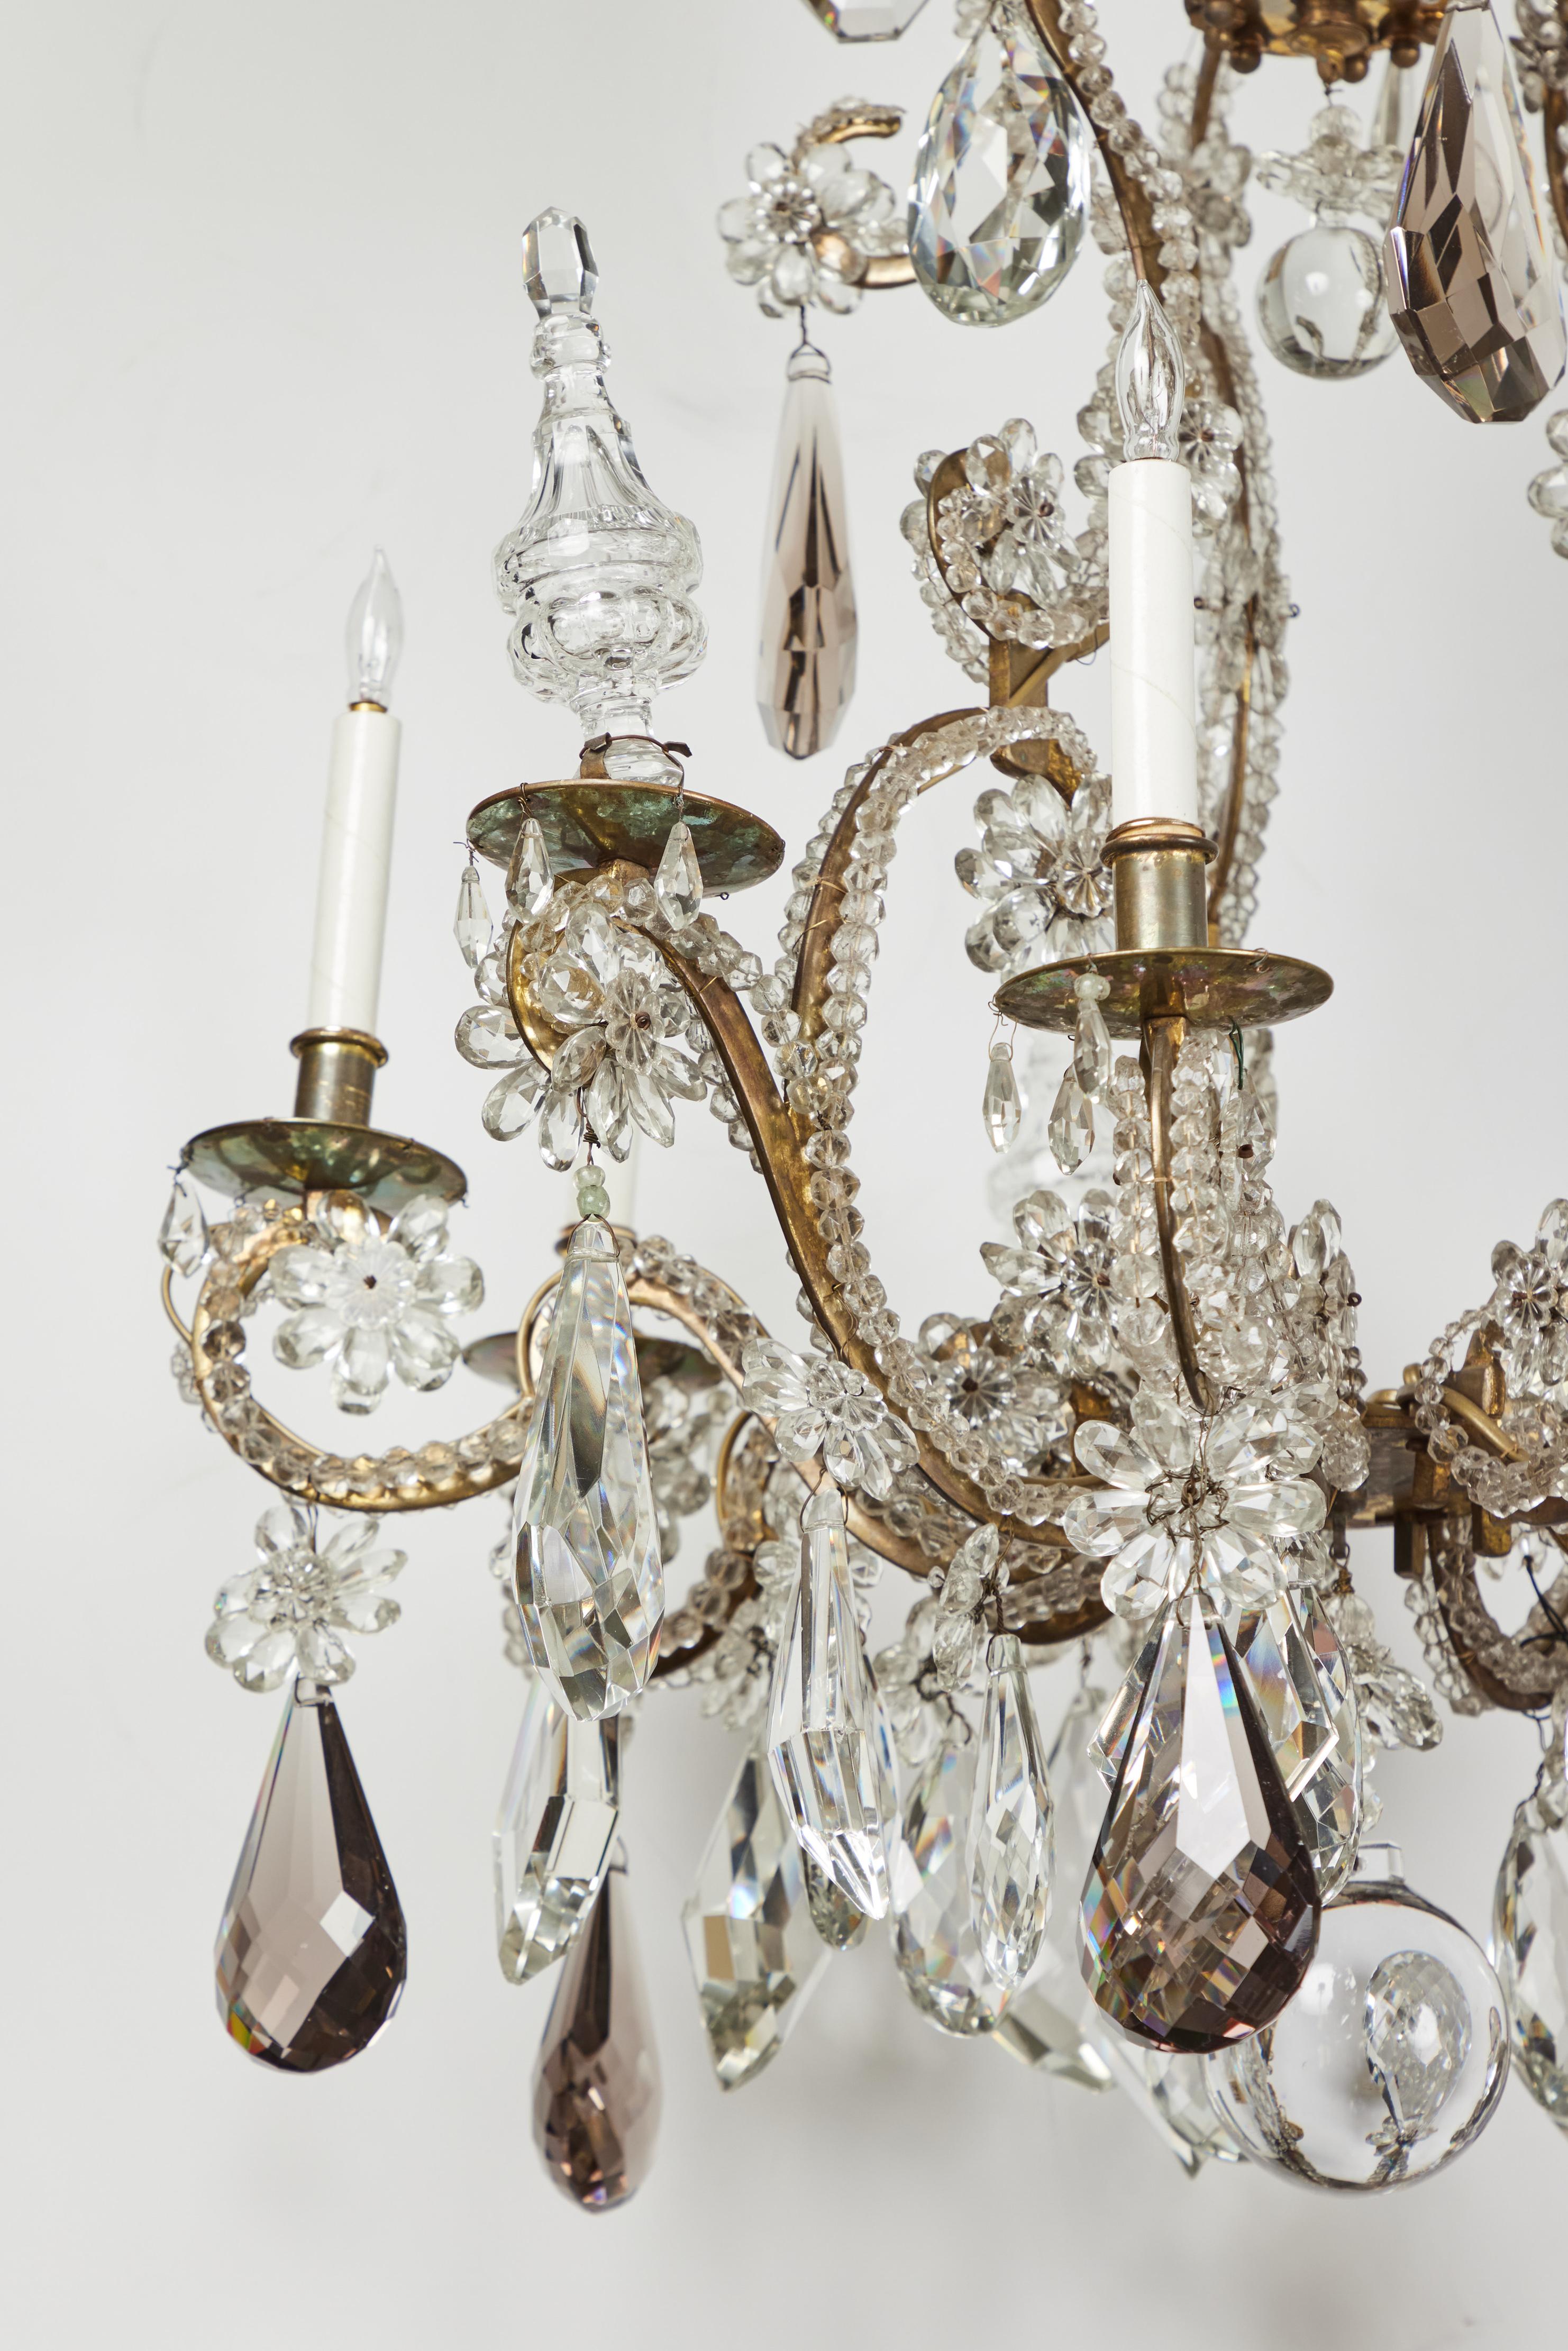 Elegant 6 light chandelier by renowned French maker Maison Jansen. This chandelier features crystal and smokey quartz teardrops, crystal poniards, crystal flowers and beading over the beautifully shaped scrolled gilded metal frame.
 